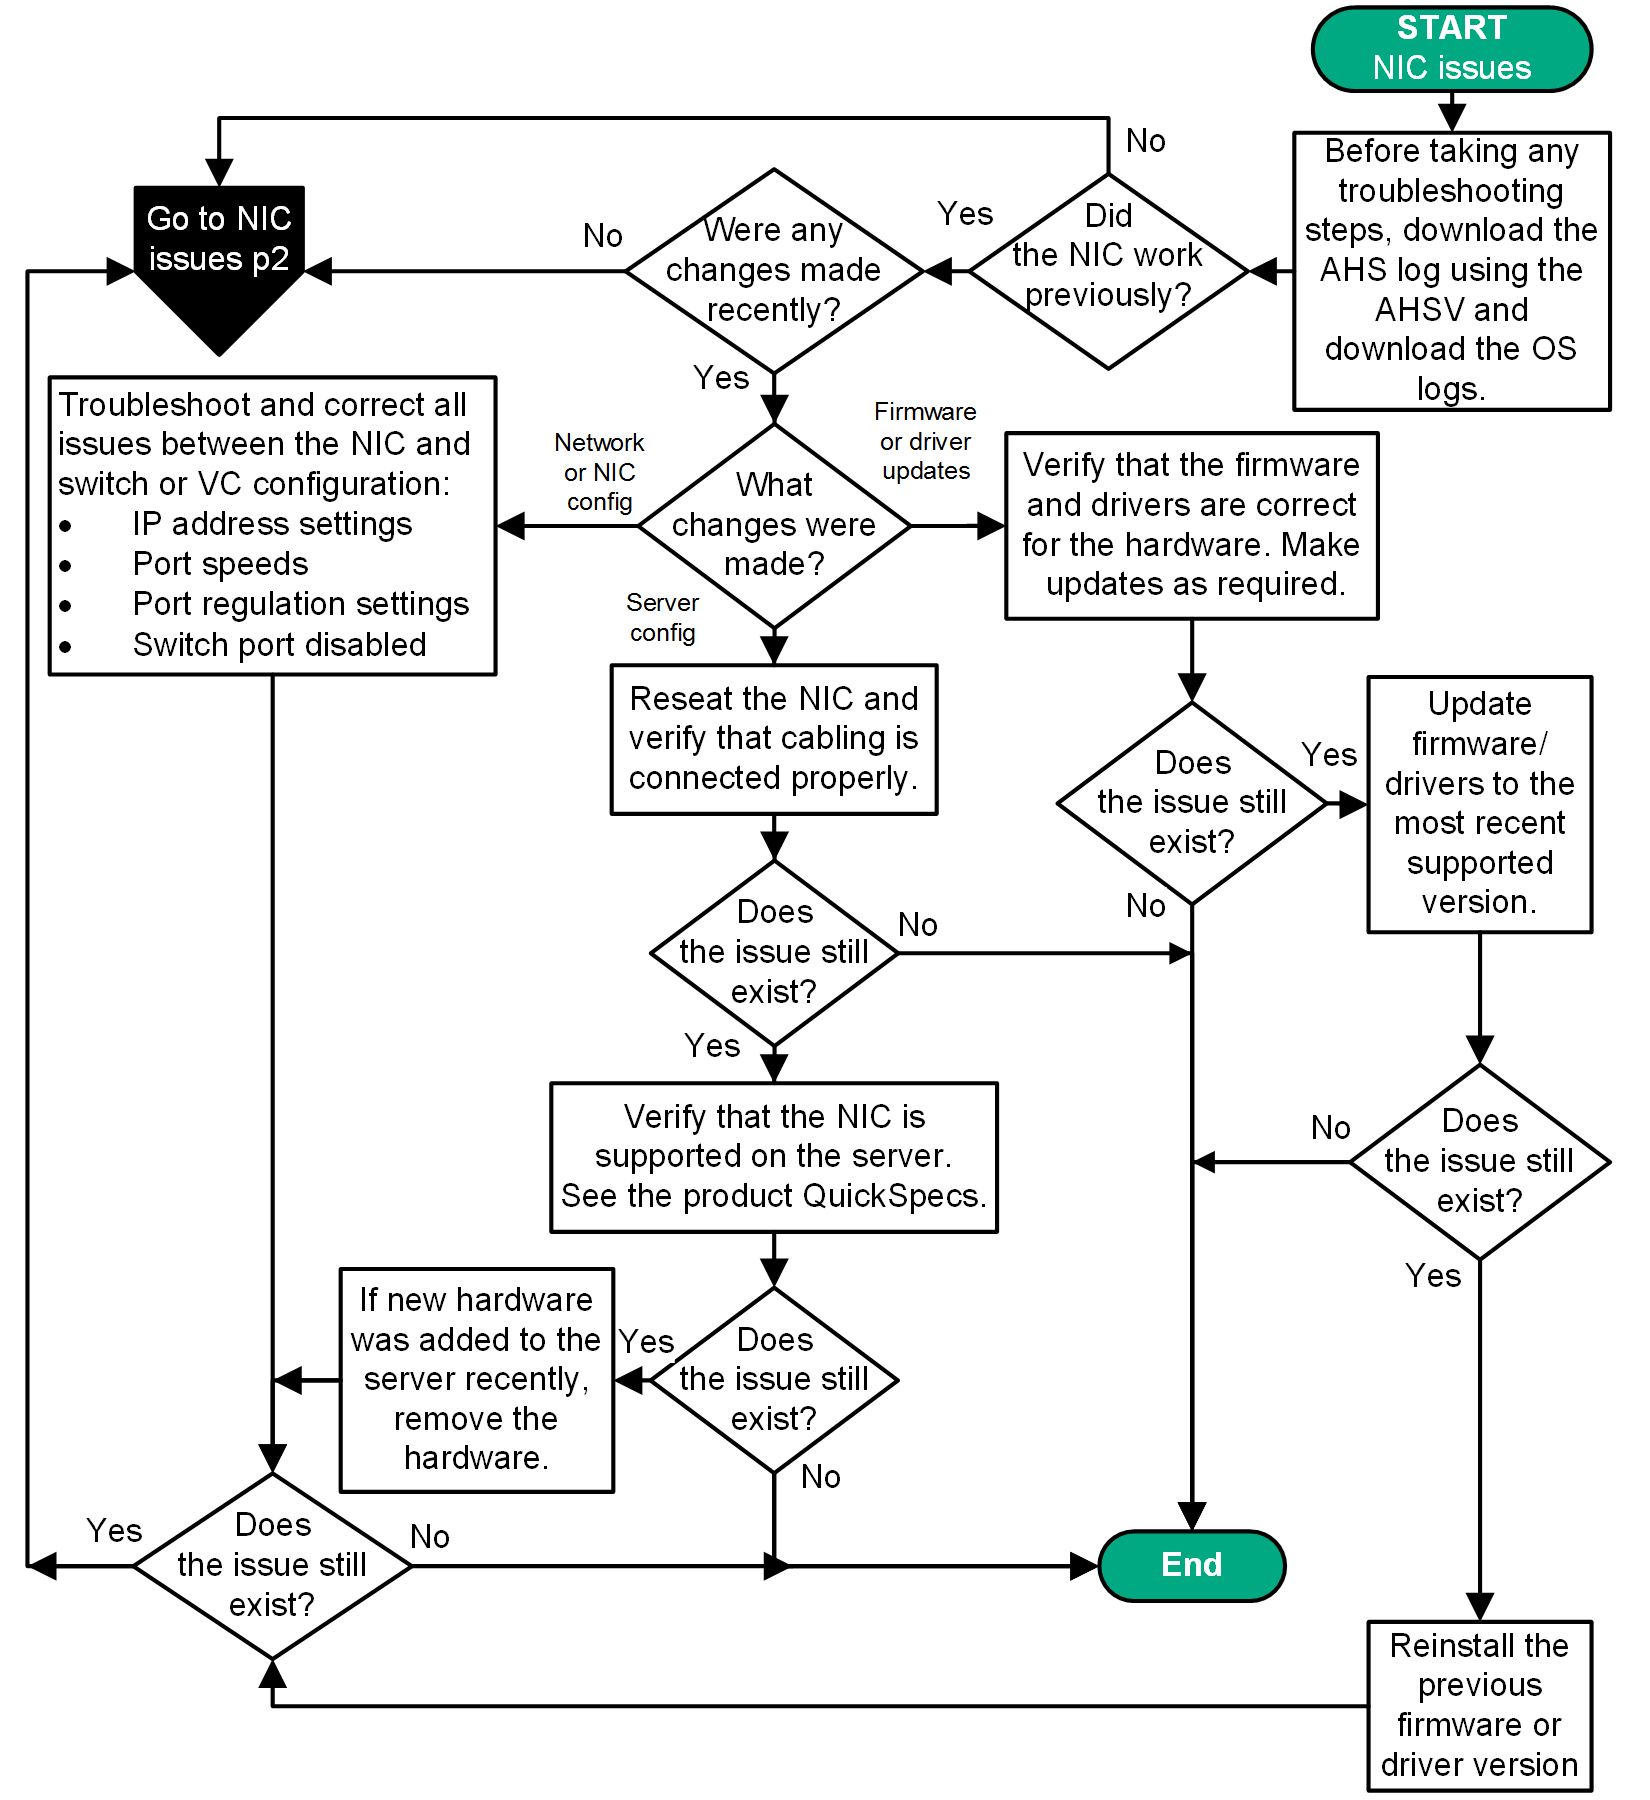 NIC issues flowchart (1 of 2)